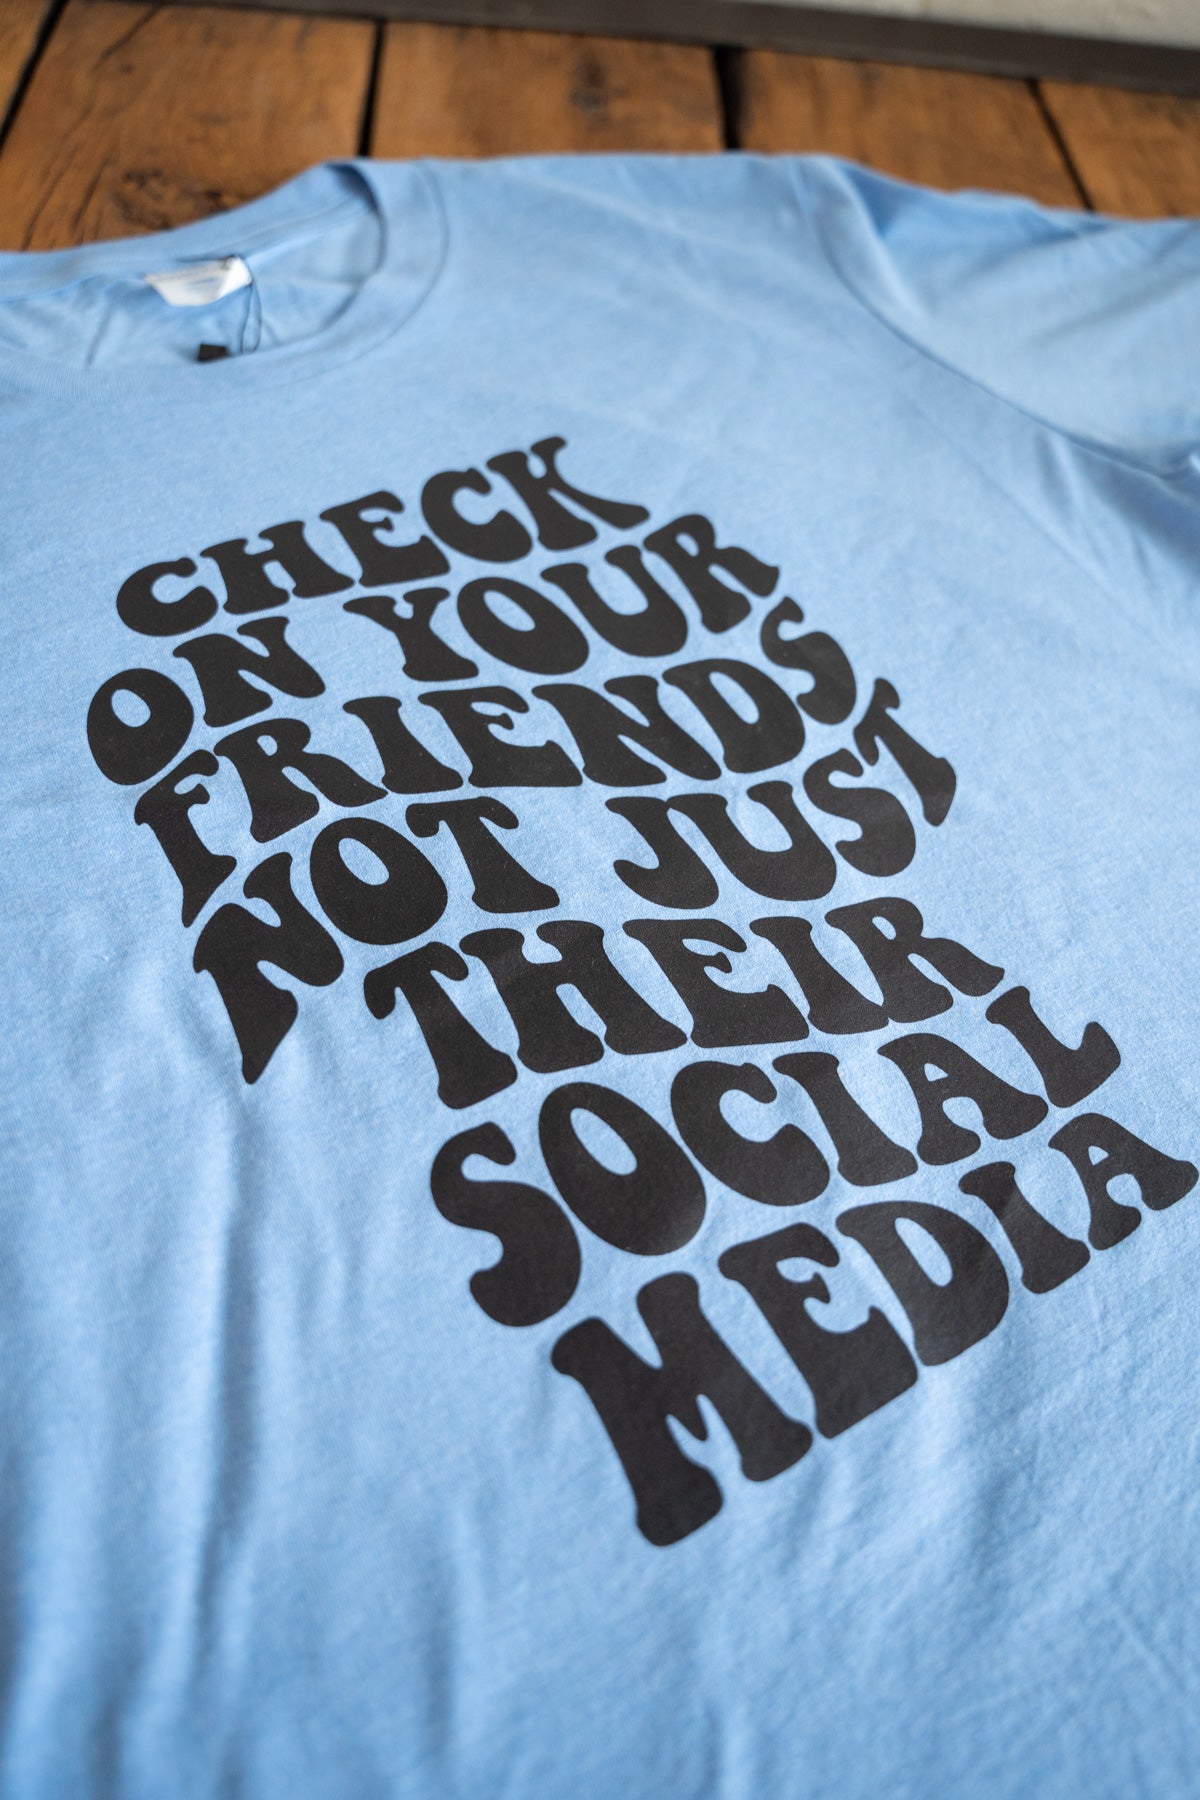 Check on Your Friends Tee